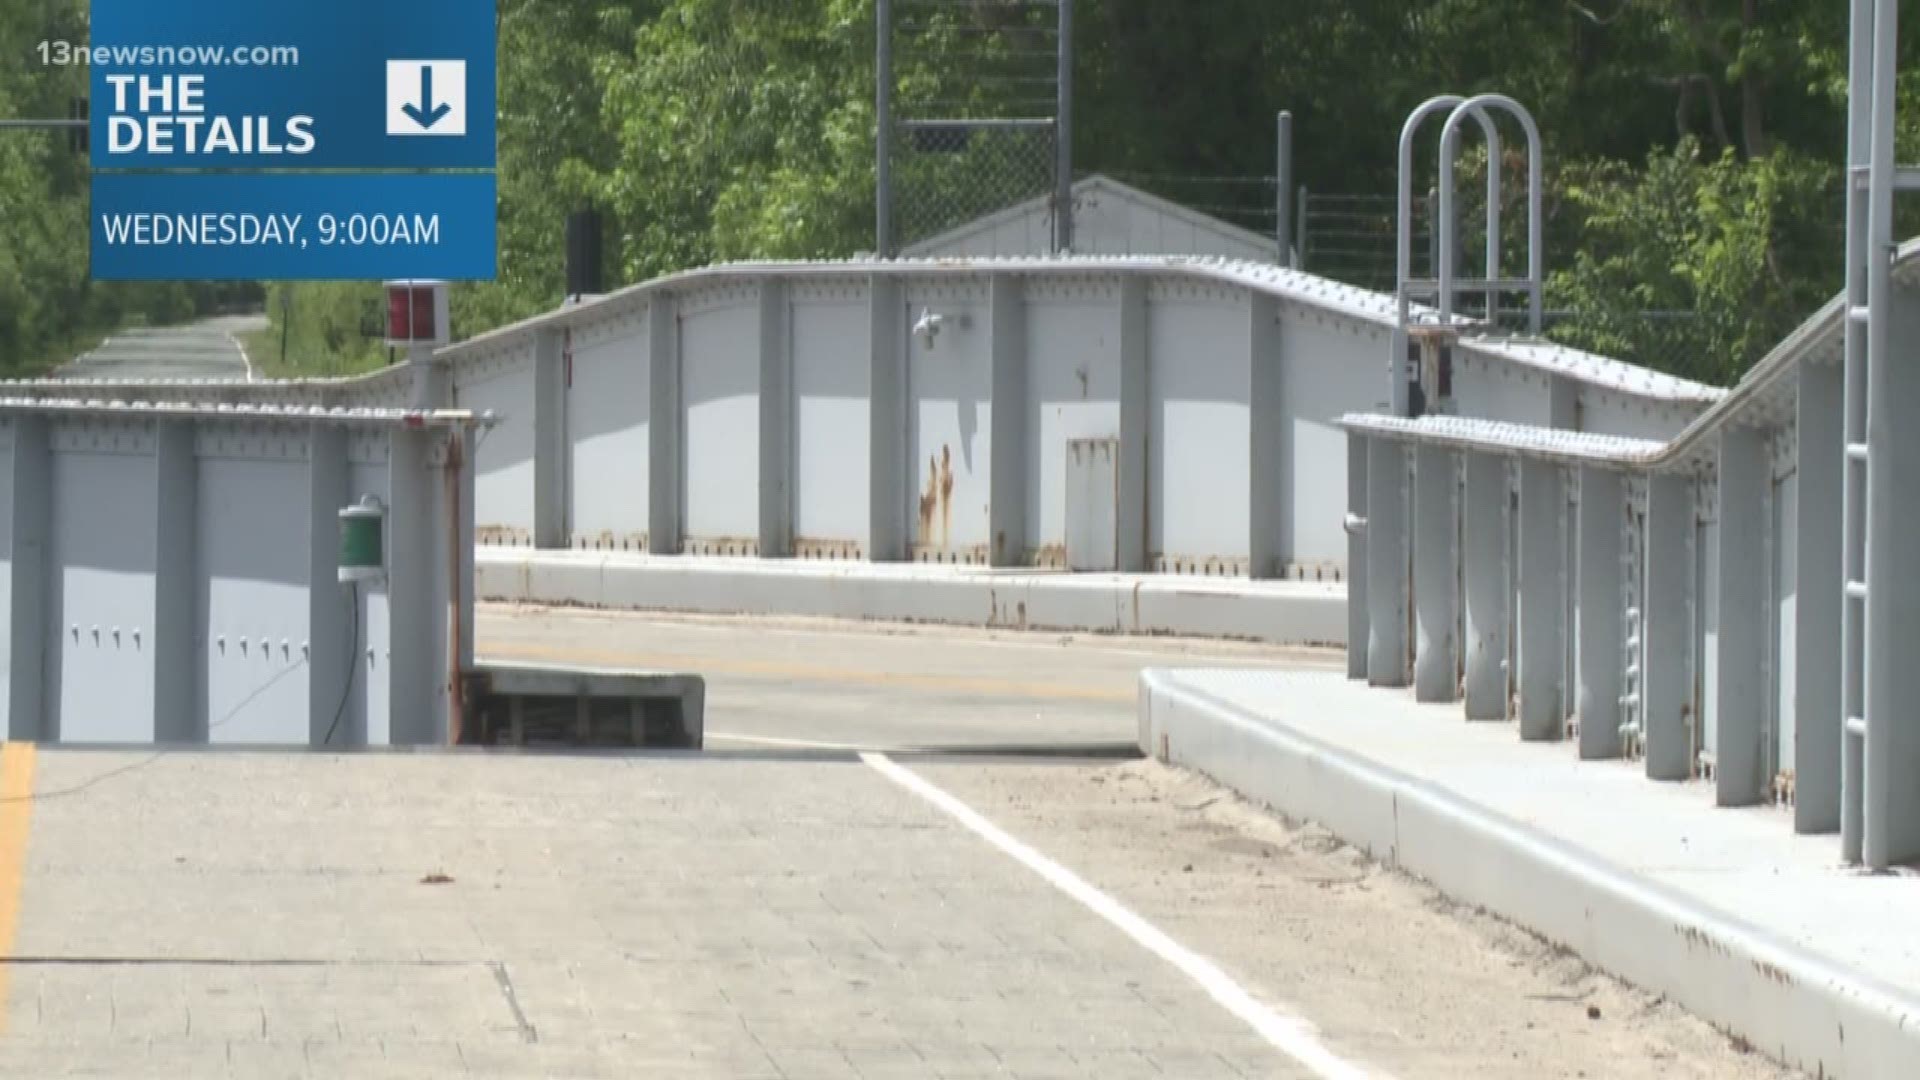 The North Landing Bridge will be closed again from Wednesday until Friday at 2 p.m.